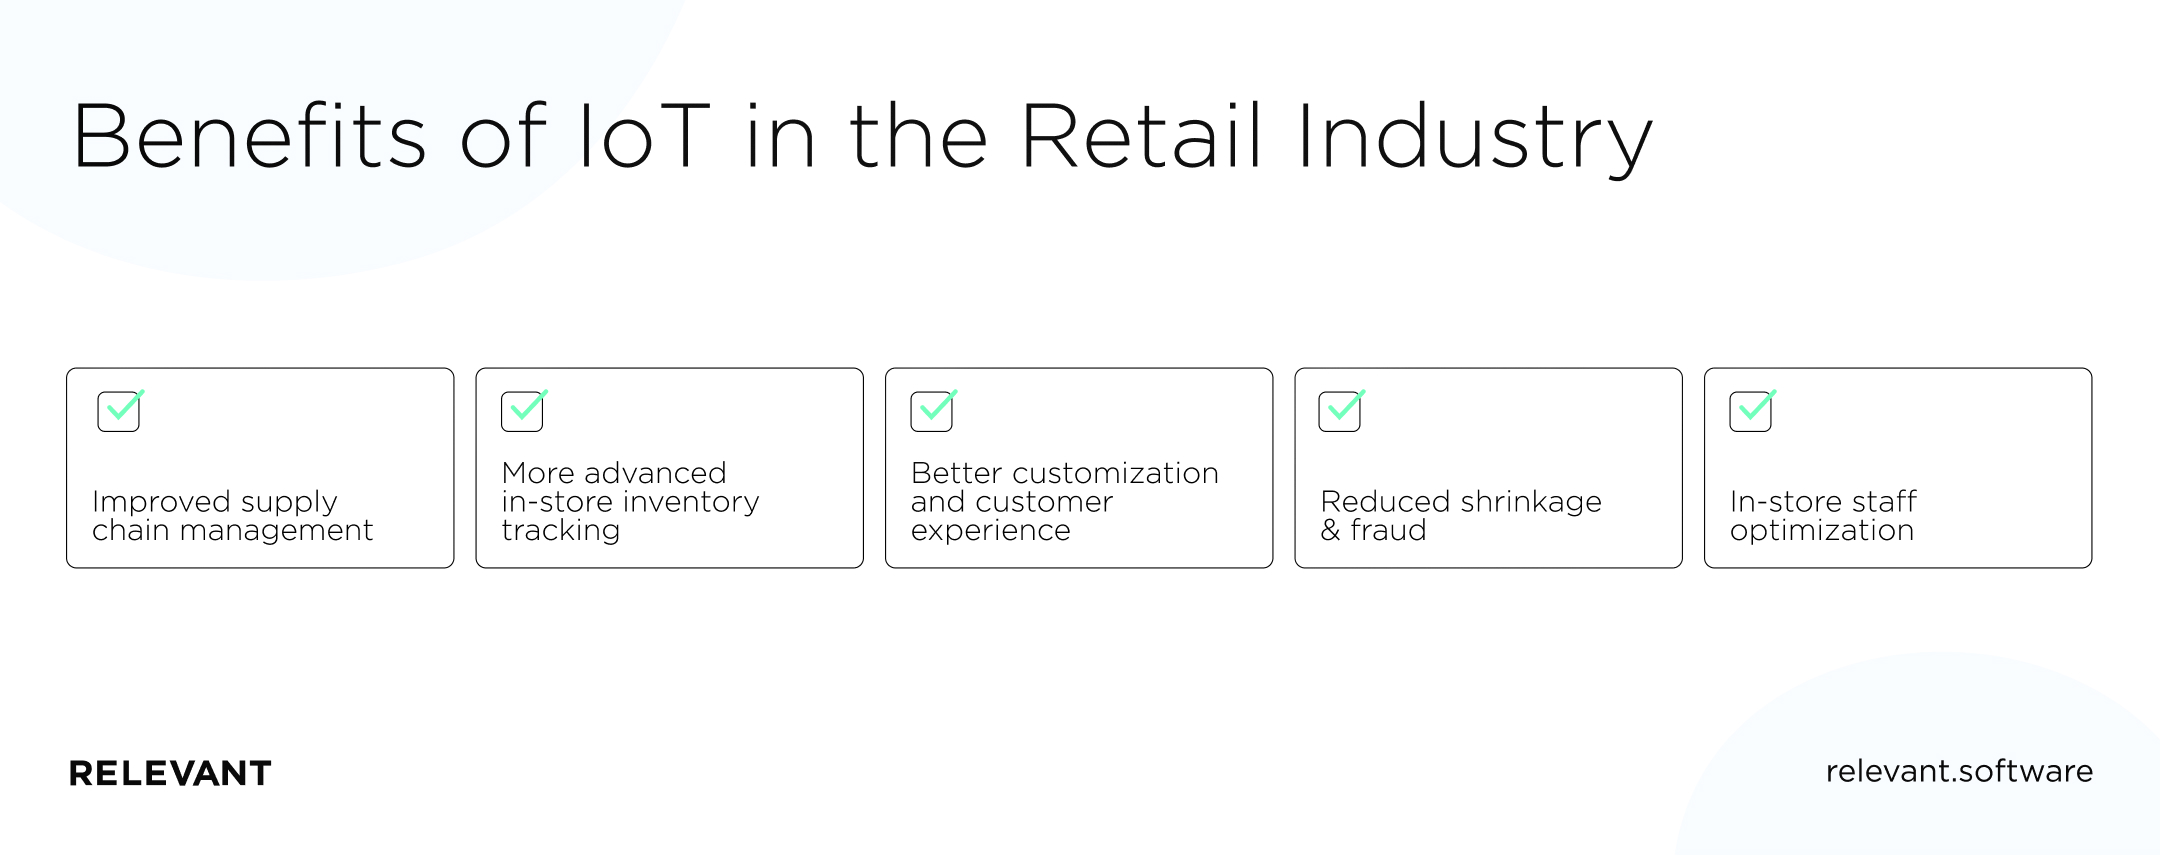 Benefits of IoT in the Retail Industry